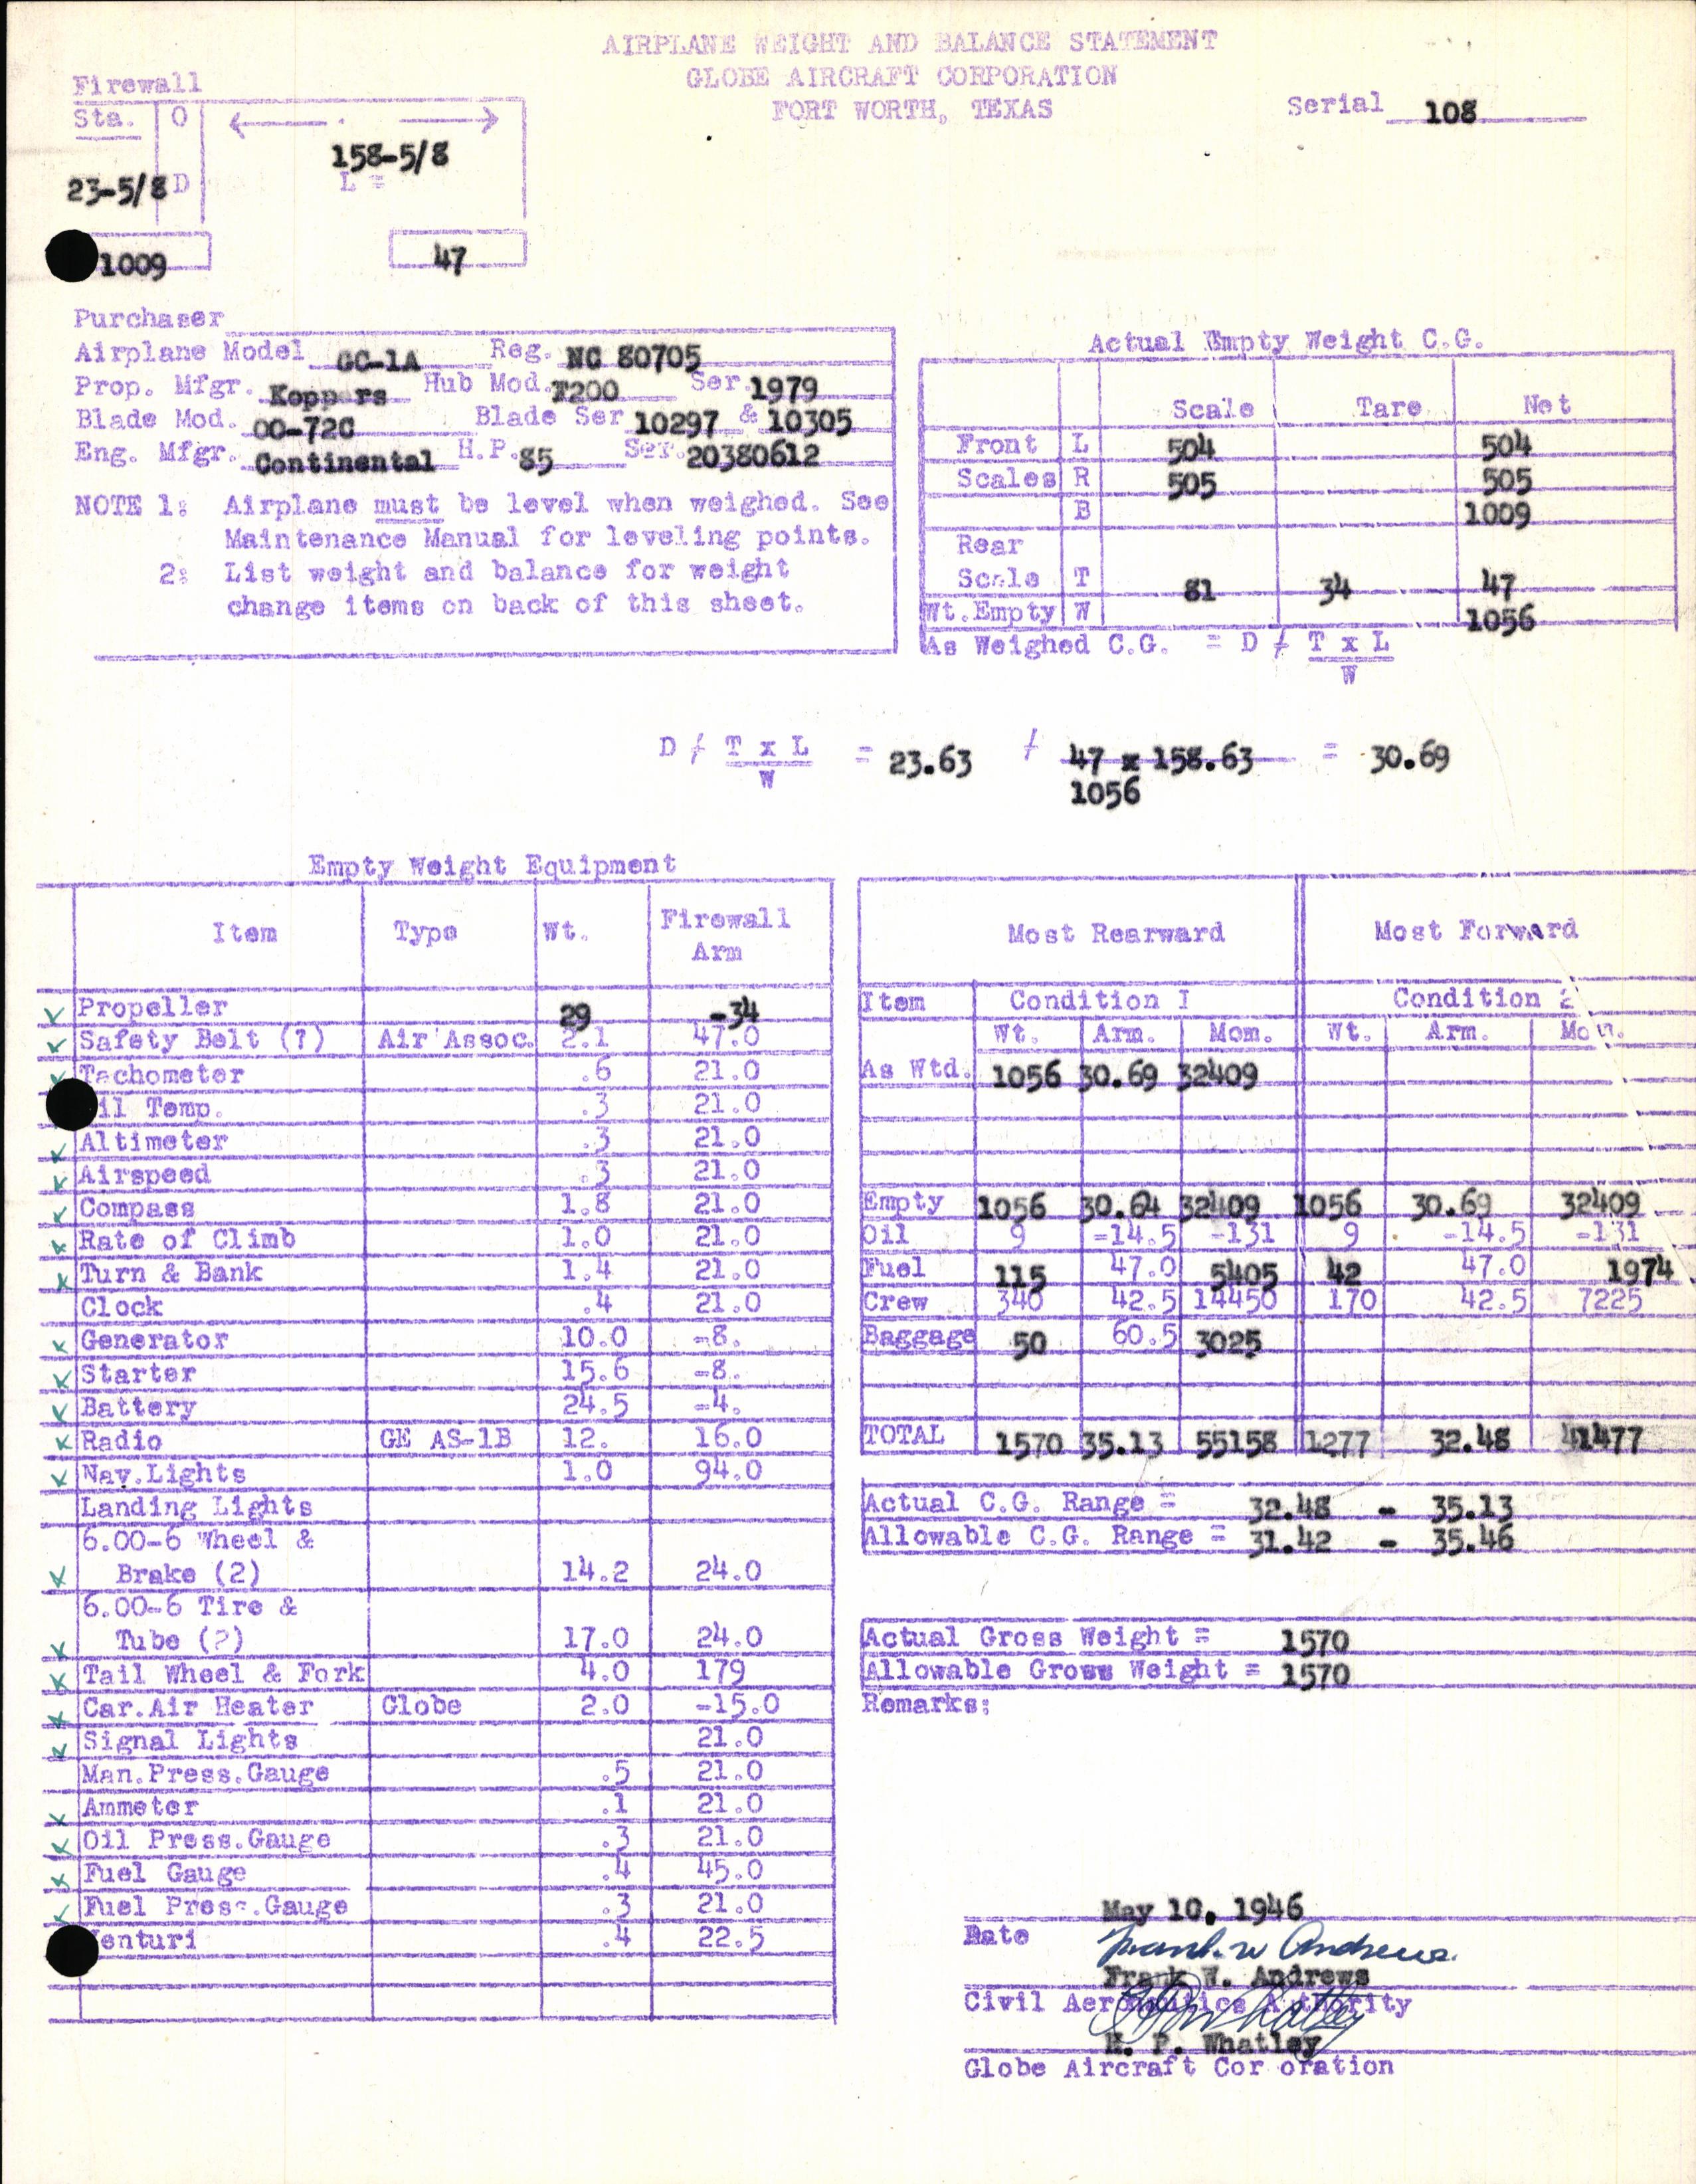 Sample page 11 from AirCorps Library document: Technical Information for Serial Number 108